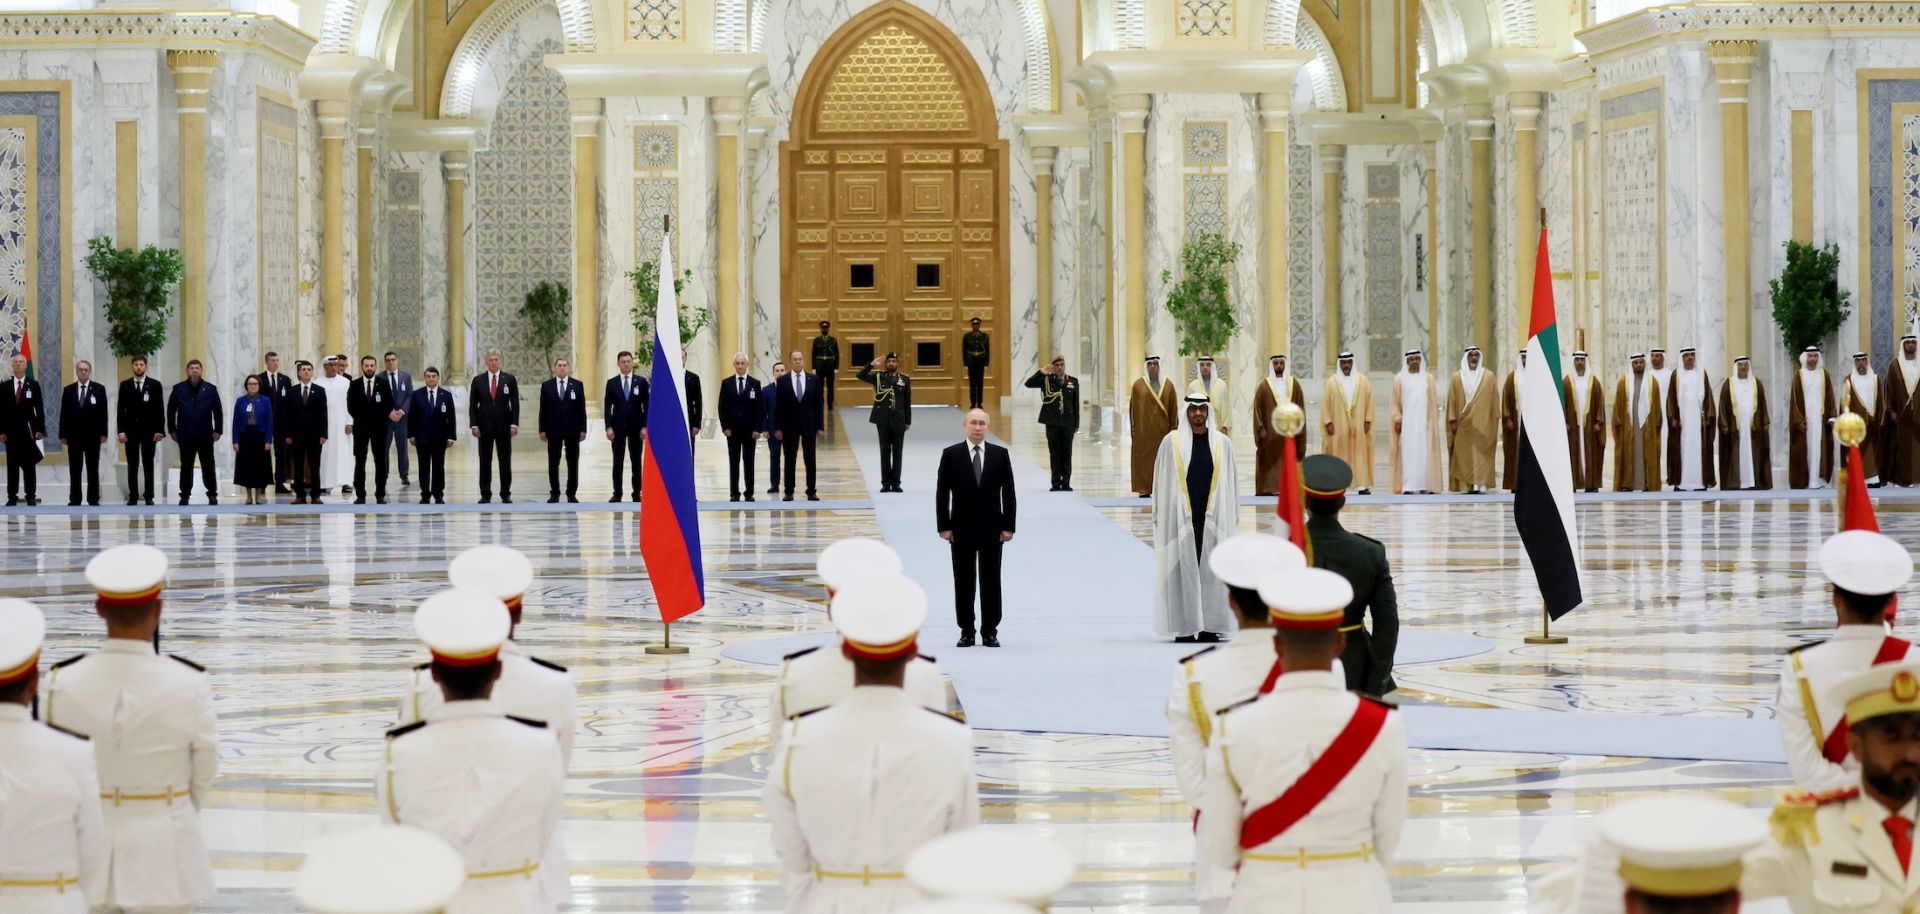 Russian President Vladimir Putin and UAE leader Sheikh Mohammed bin Zayed Al Nahyan attend a welcoming ceremony ahead of their talks in Abu Dhabi on Dec. 6, 2023.